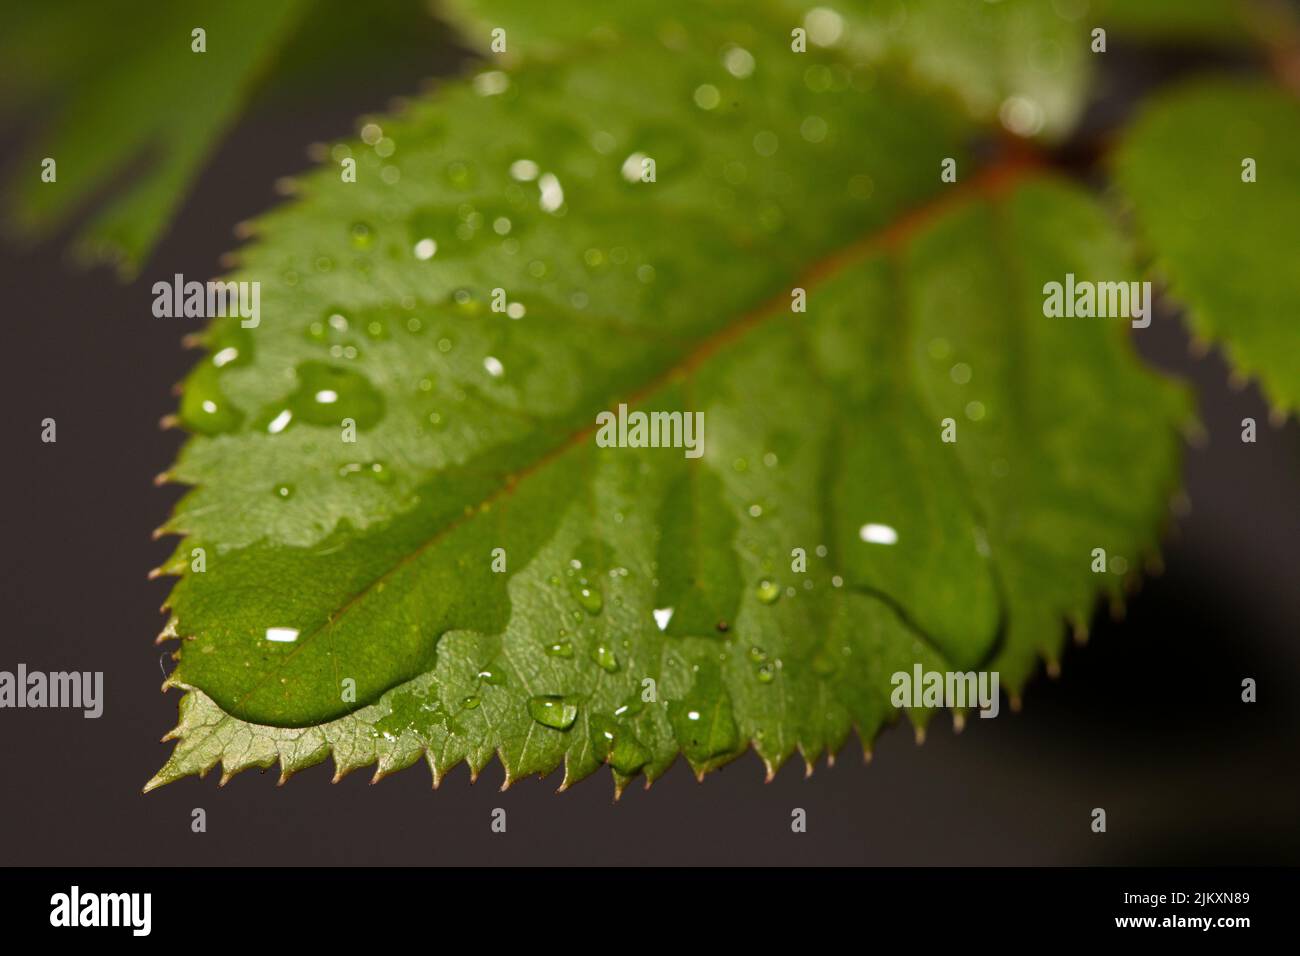 A closeup shot of a green leaf with water droplets on it Stock Photo